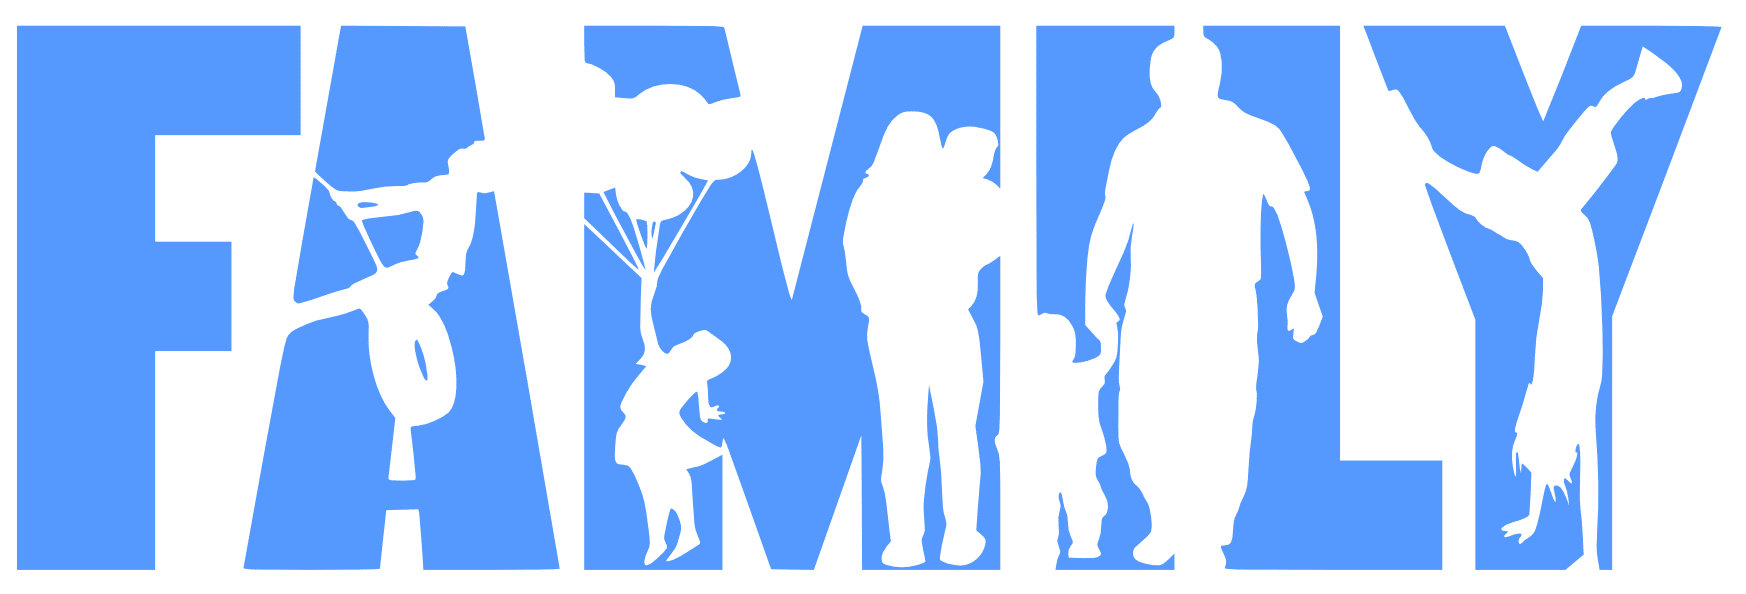 Free Family SVG Cutting File